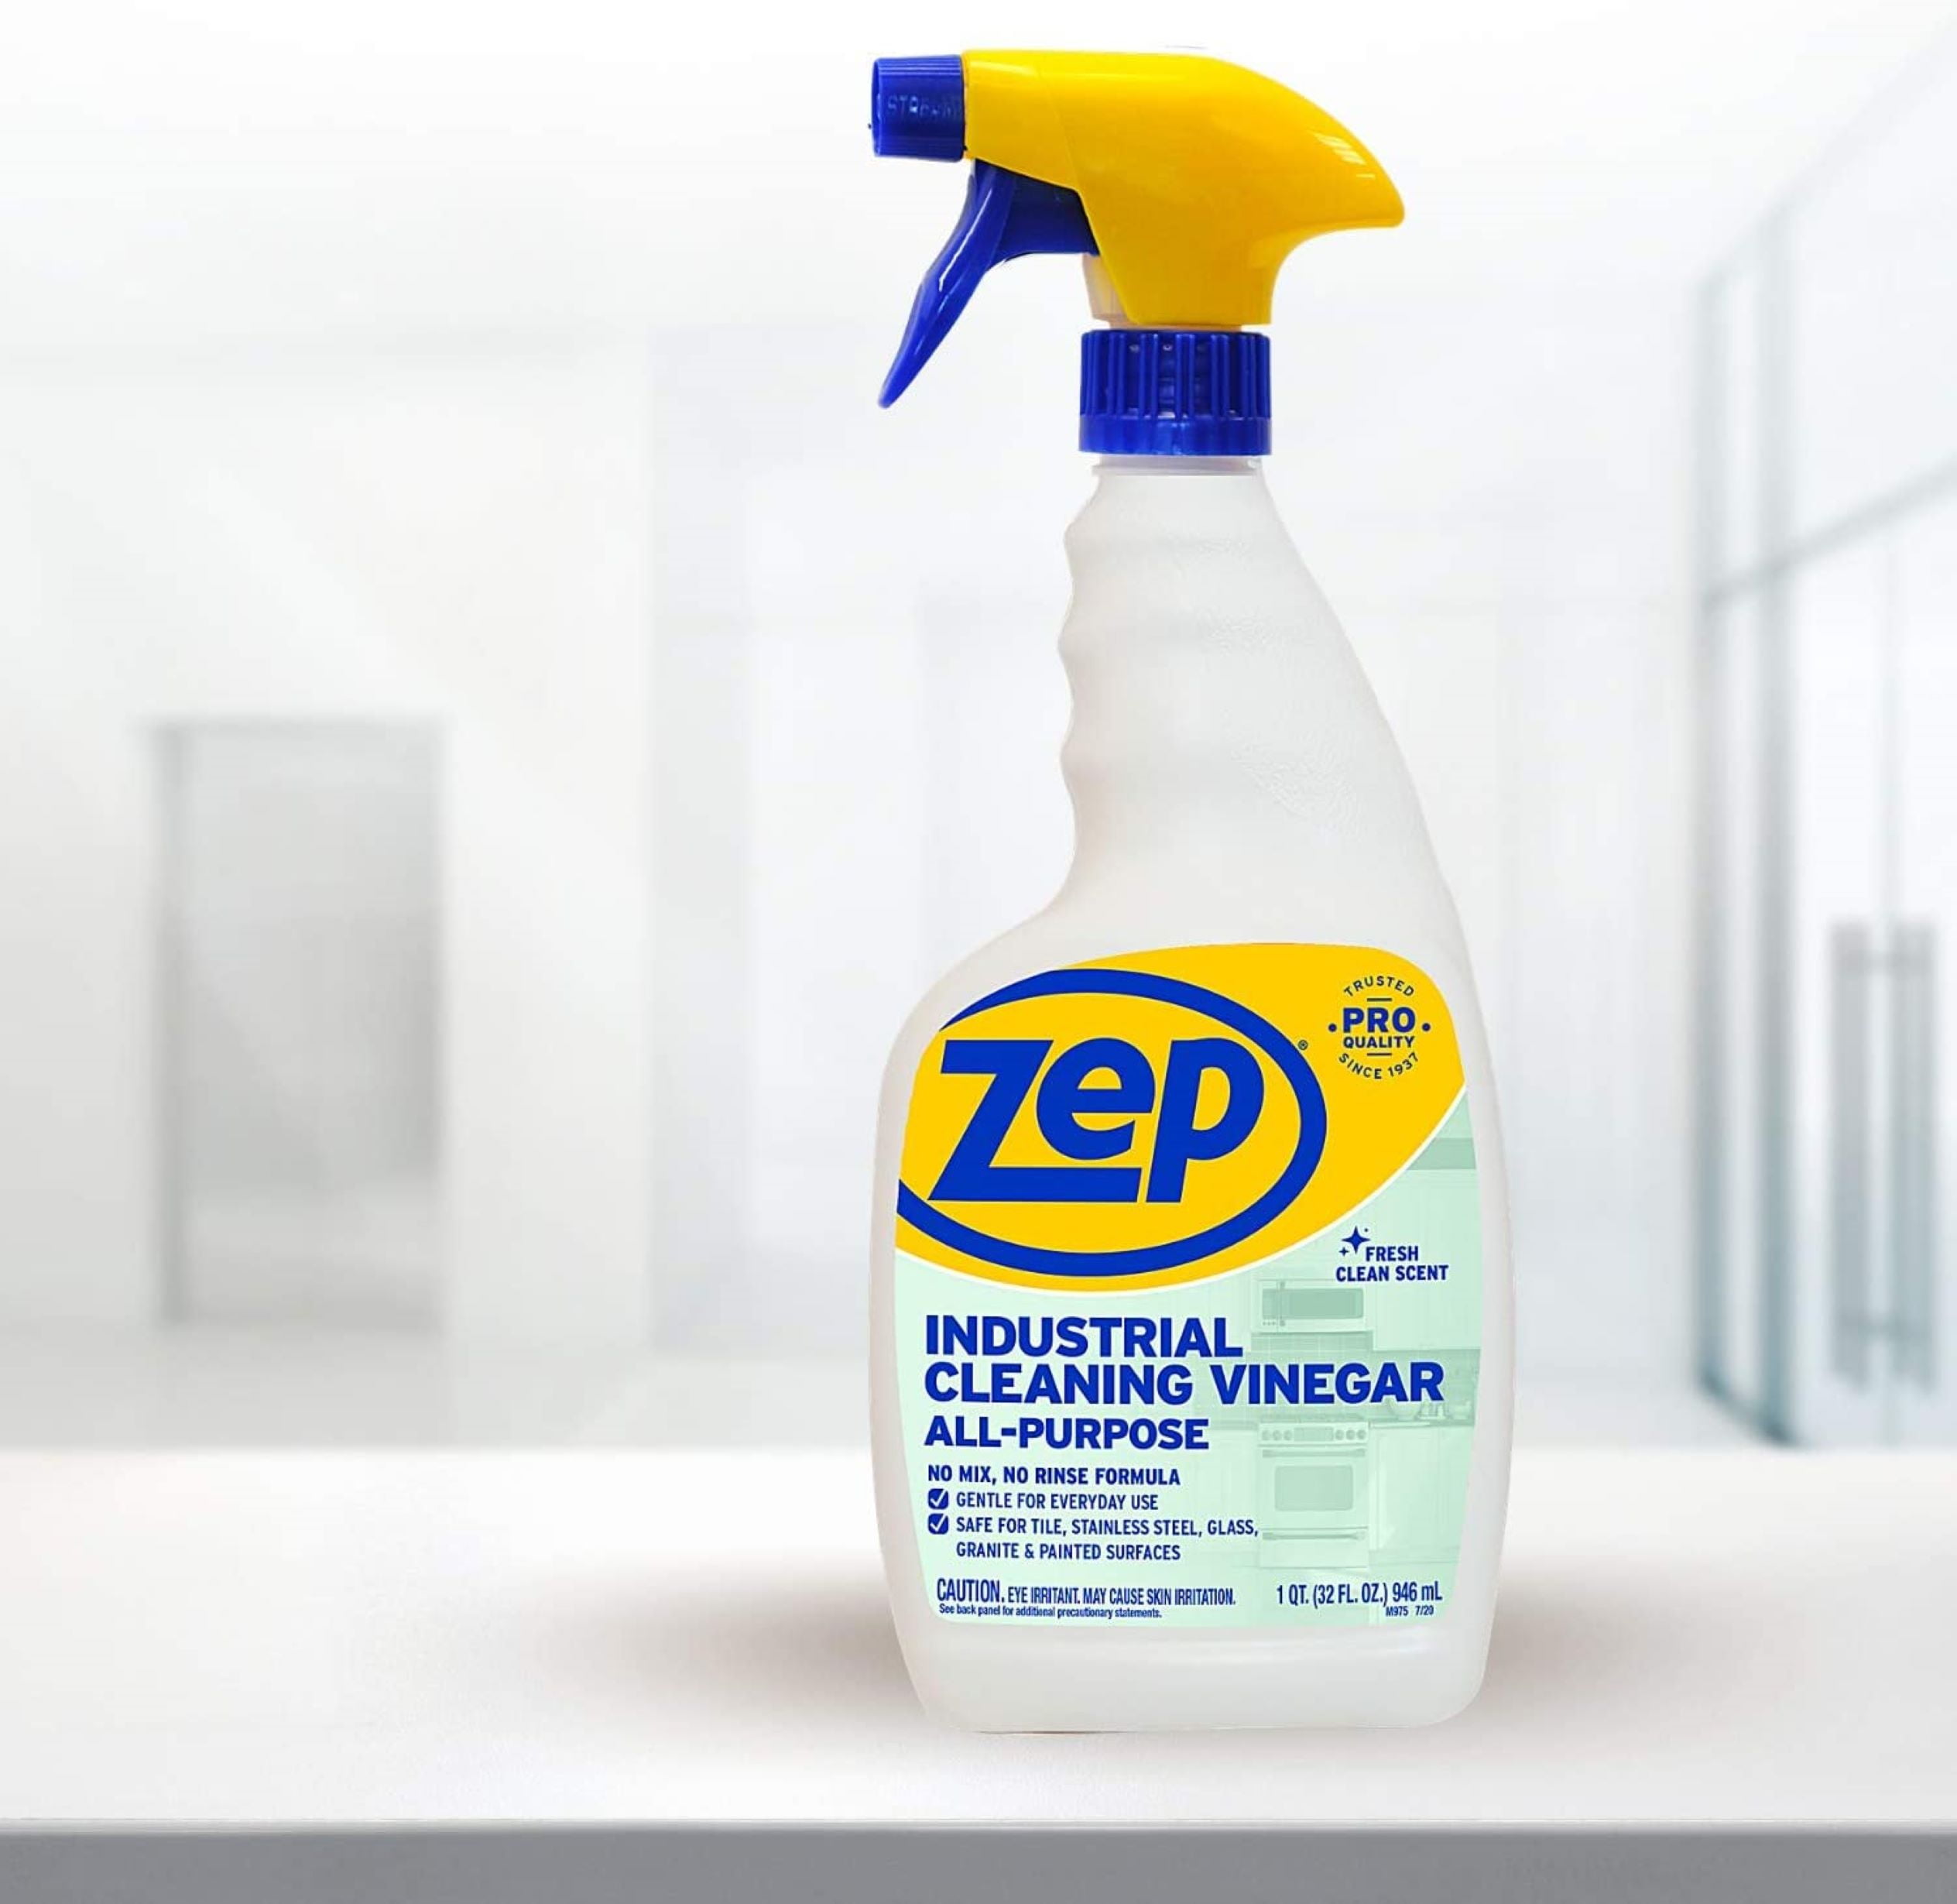 All-Purpose Cleaner with Vinegar Added – Zep Inc.